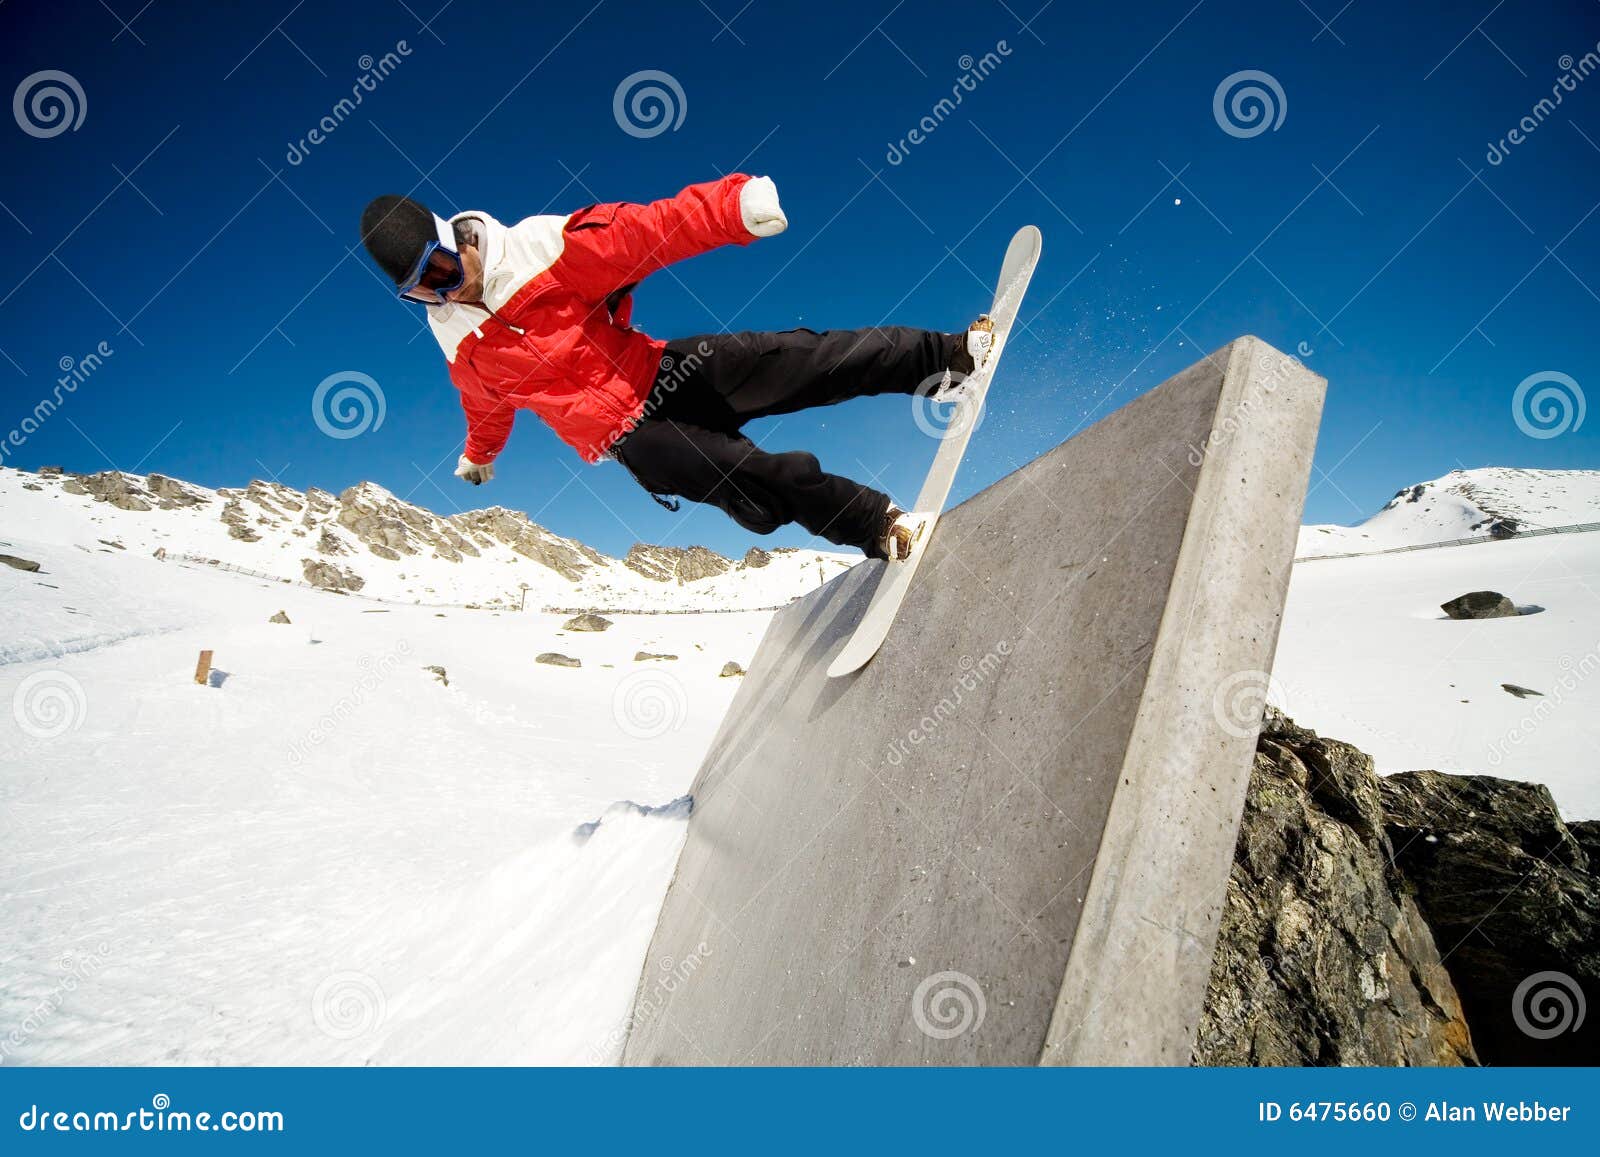 Snowboard Wall Ride Stock Photo Image 6475660 for The Incredible and Interesting snowboard wall ride tricks regarding Your house